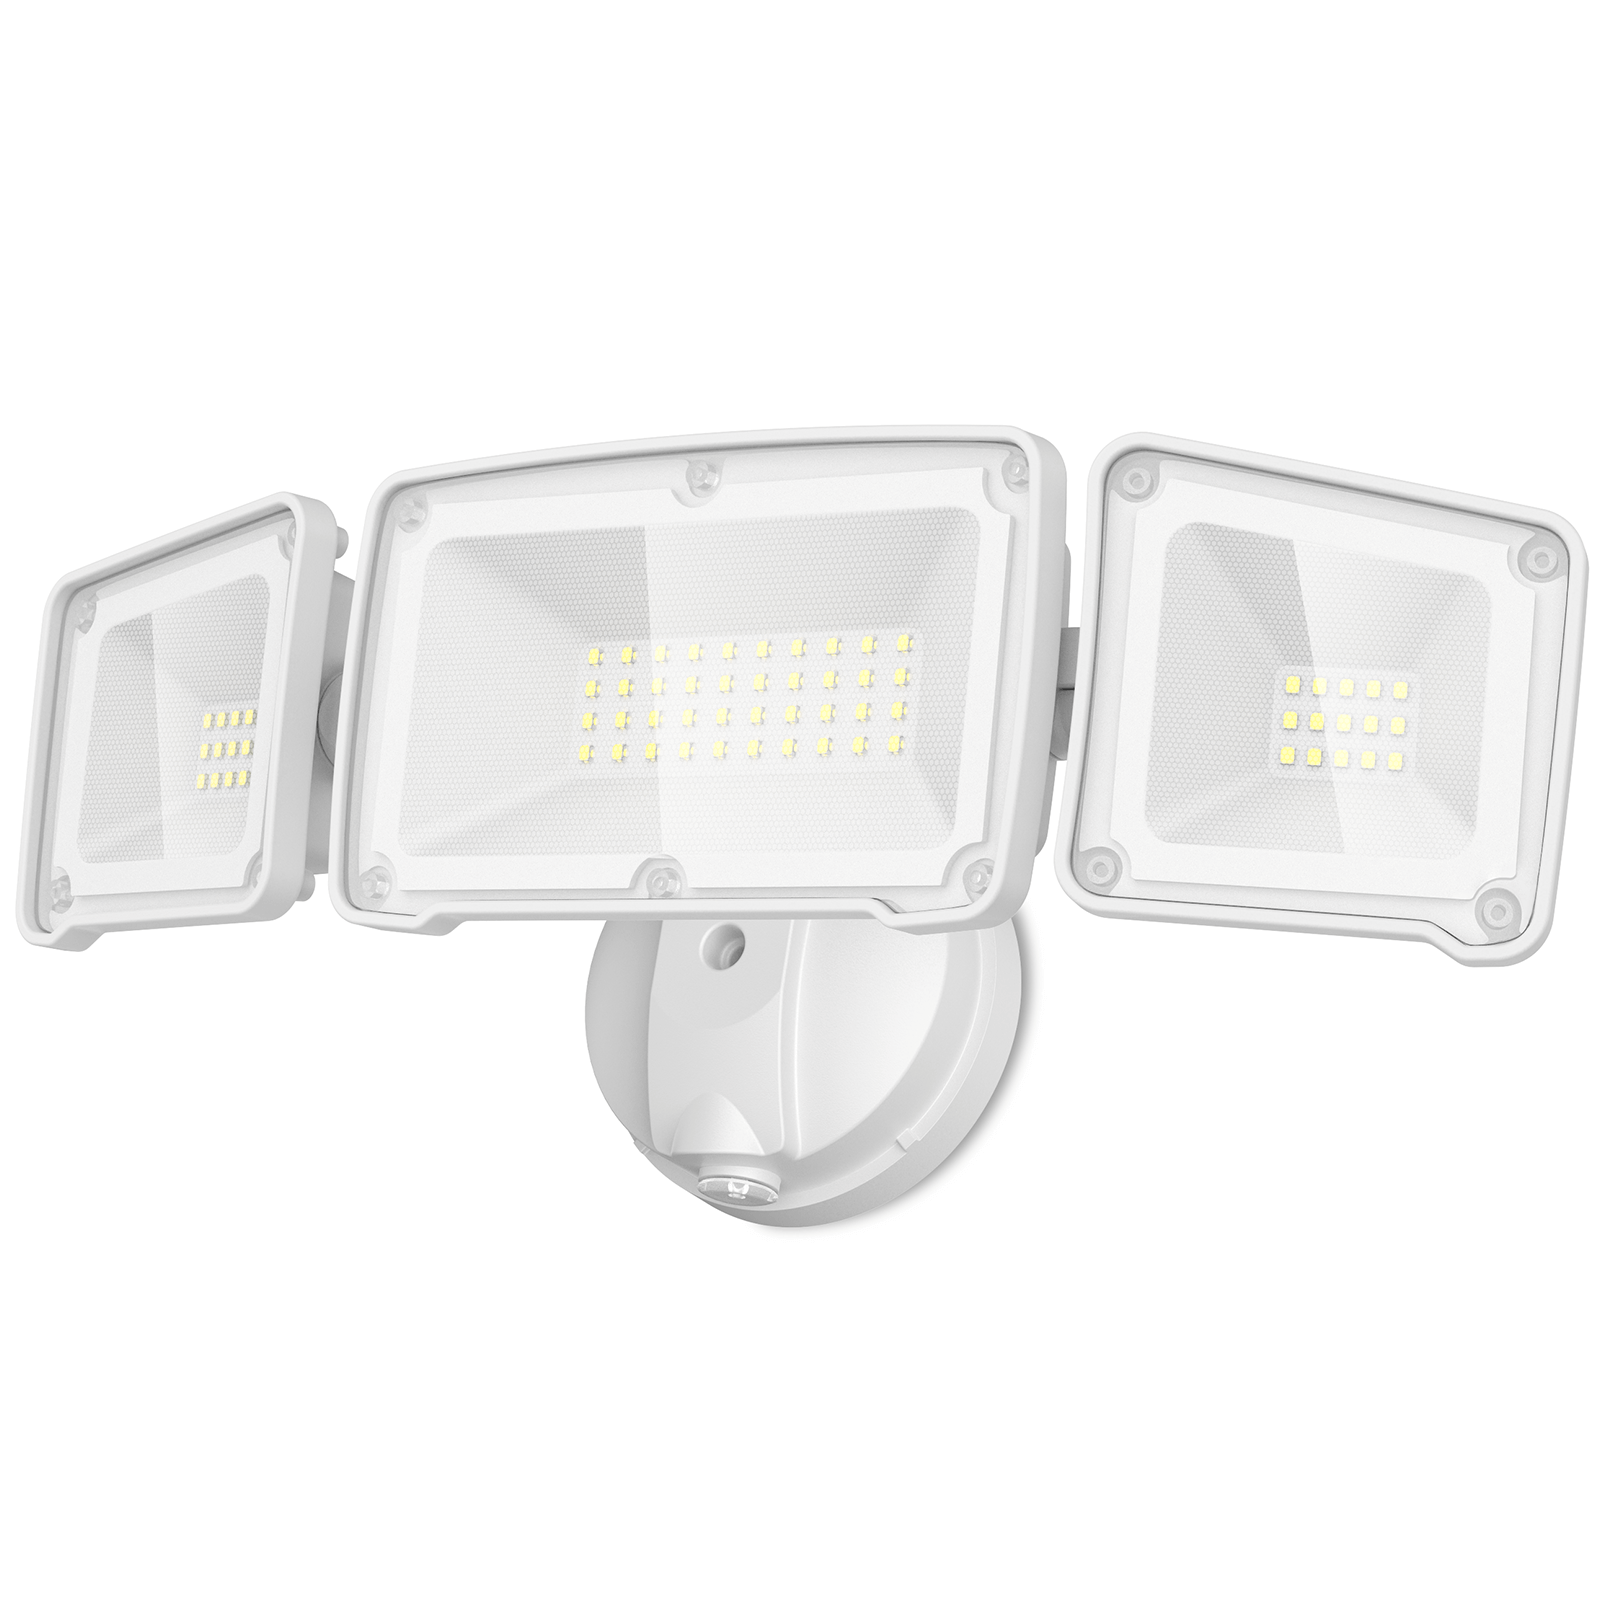 LEPOWER 3000LM LED Flood Light Outdoor, Switch Controlled LED Security Light, 28W Exterior Lights with Adjustable Heads, 5500K, IP65 Waterproof for - 4